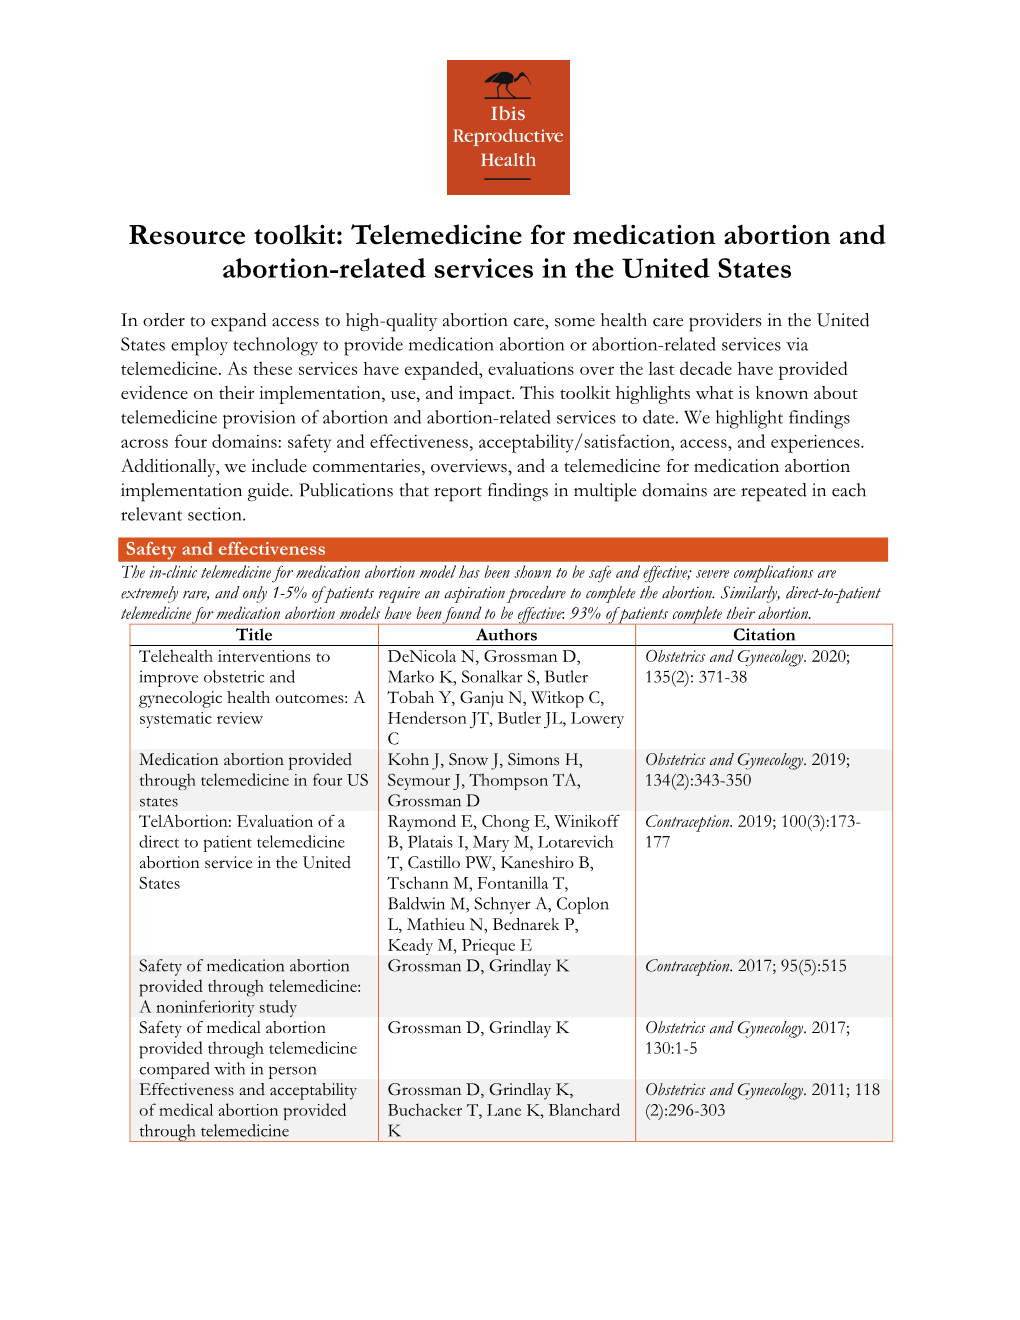 Resource Toolkit: Telemedicine for Medication Abortion and Abortion-Related Services in the United States